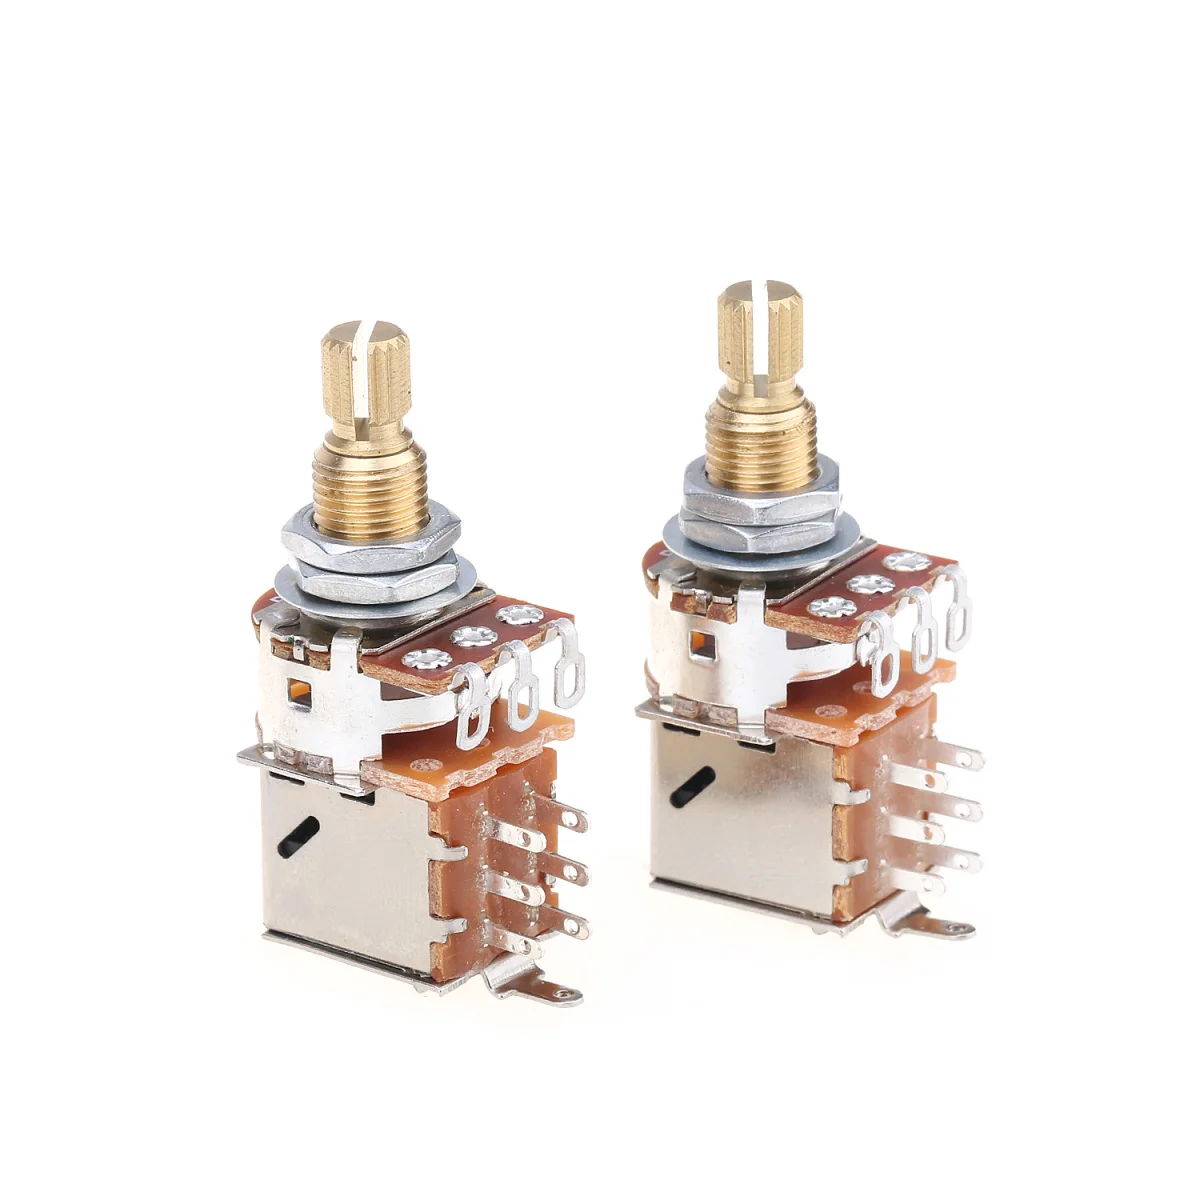 

Musiclily Pro Brass Full Metric Sized Control Pots B250K Push/Pull Linear Taper Potentiometers for Guitar(Set of 2)